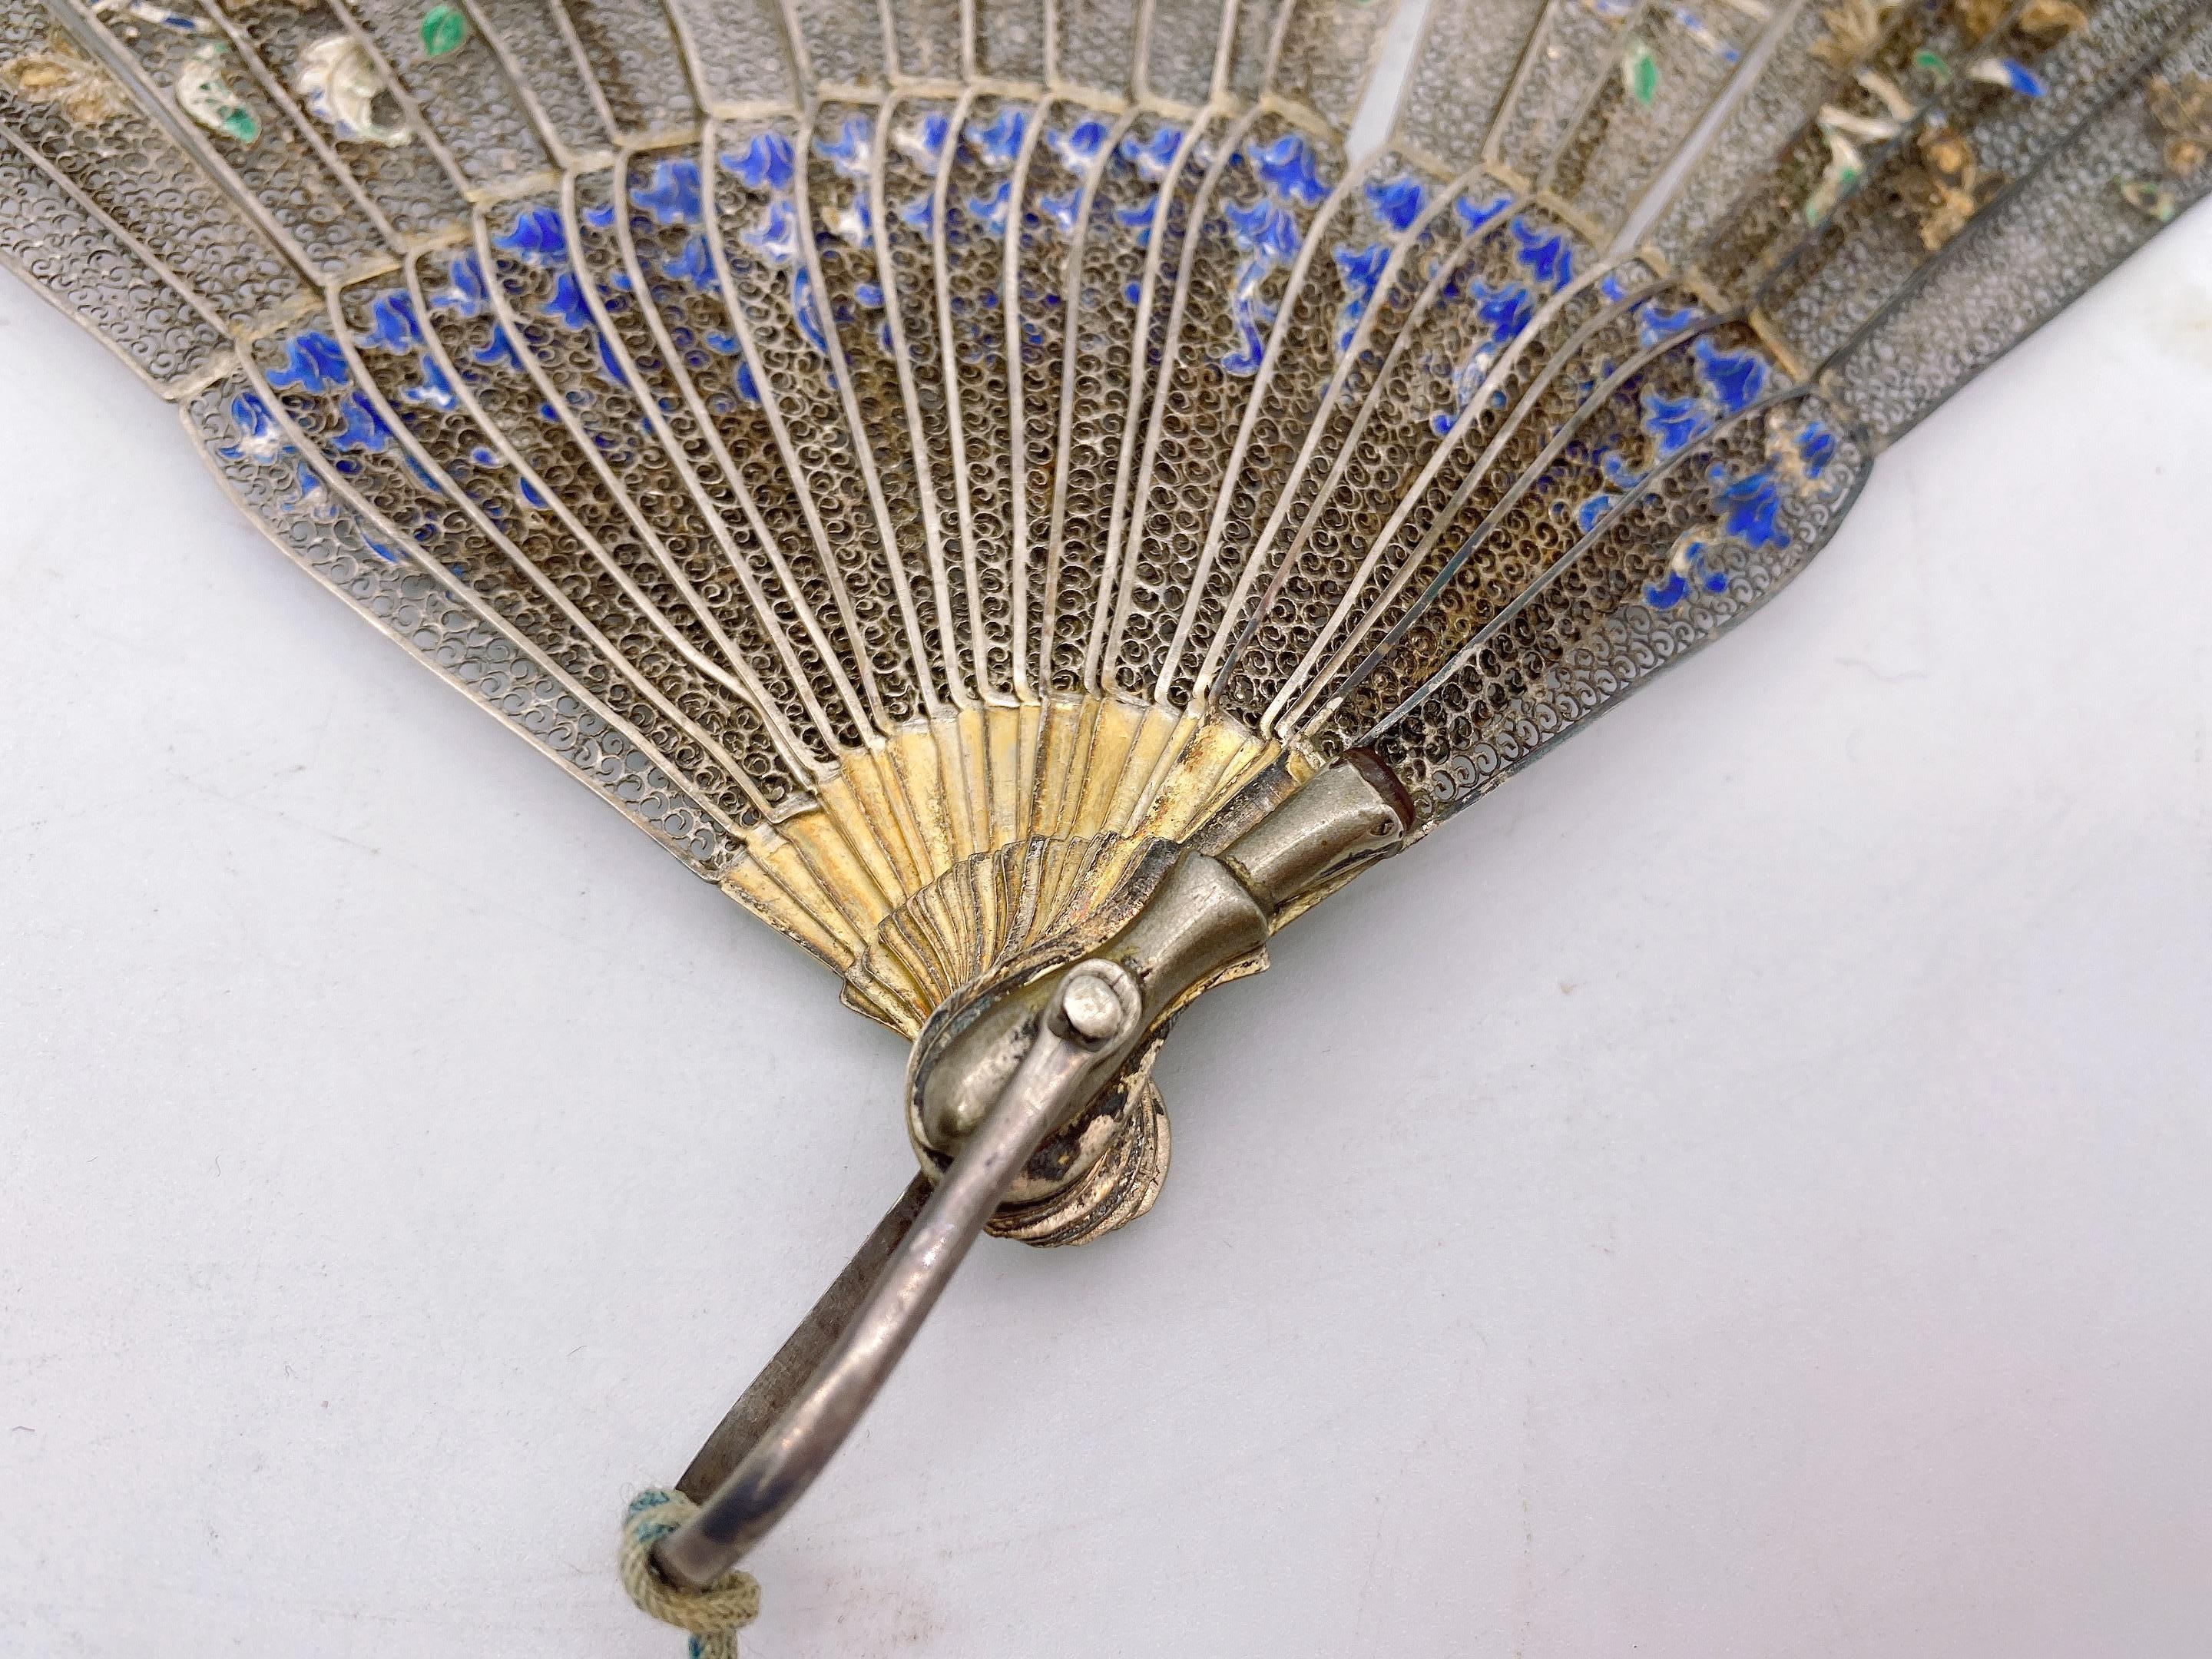 Rare Antique  Qing Dynasty Chinese Gilt Silver Filigree And Enamel Brise Fan For Sale 3